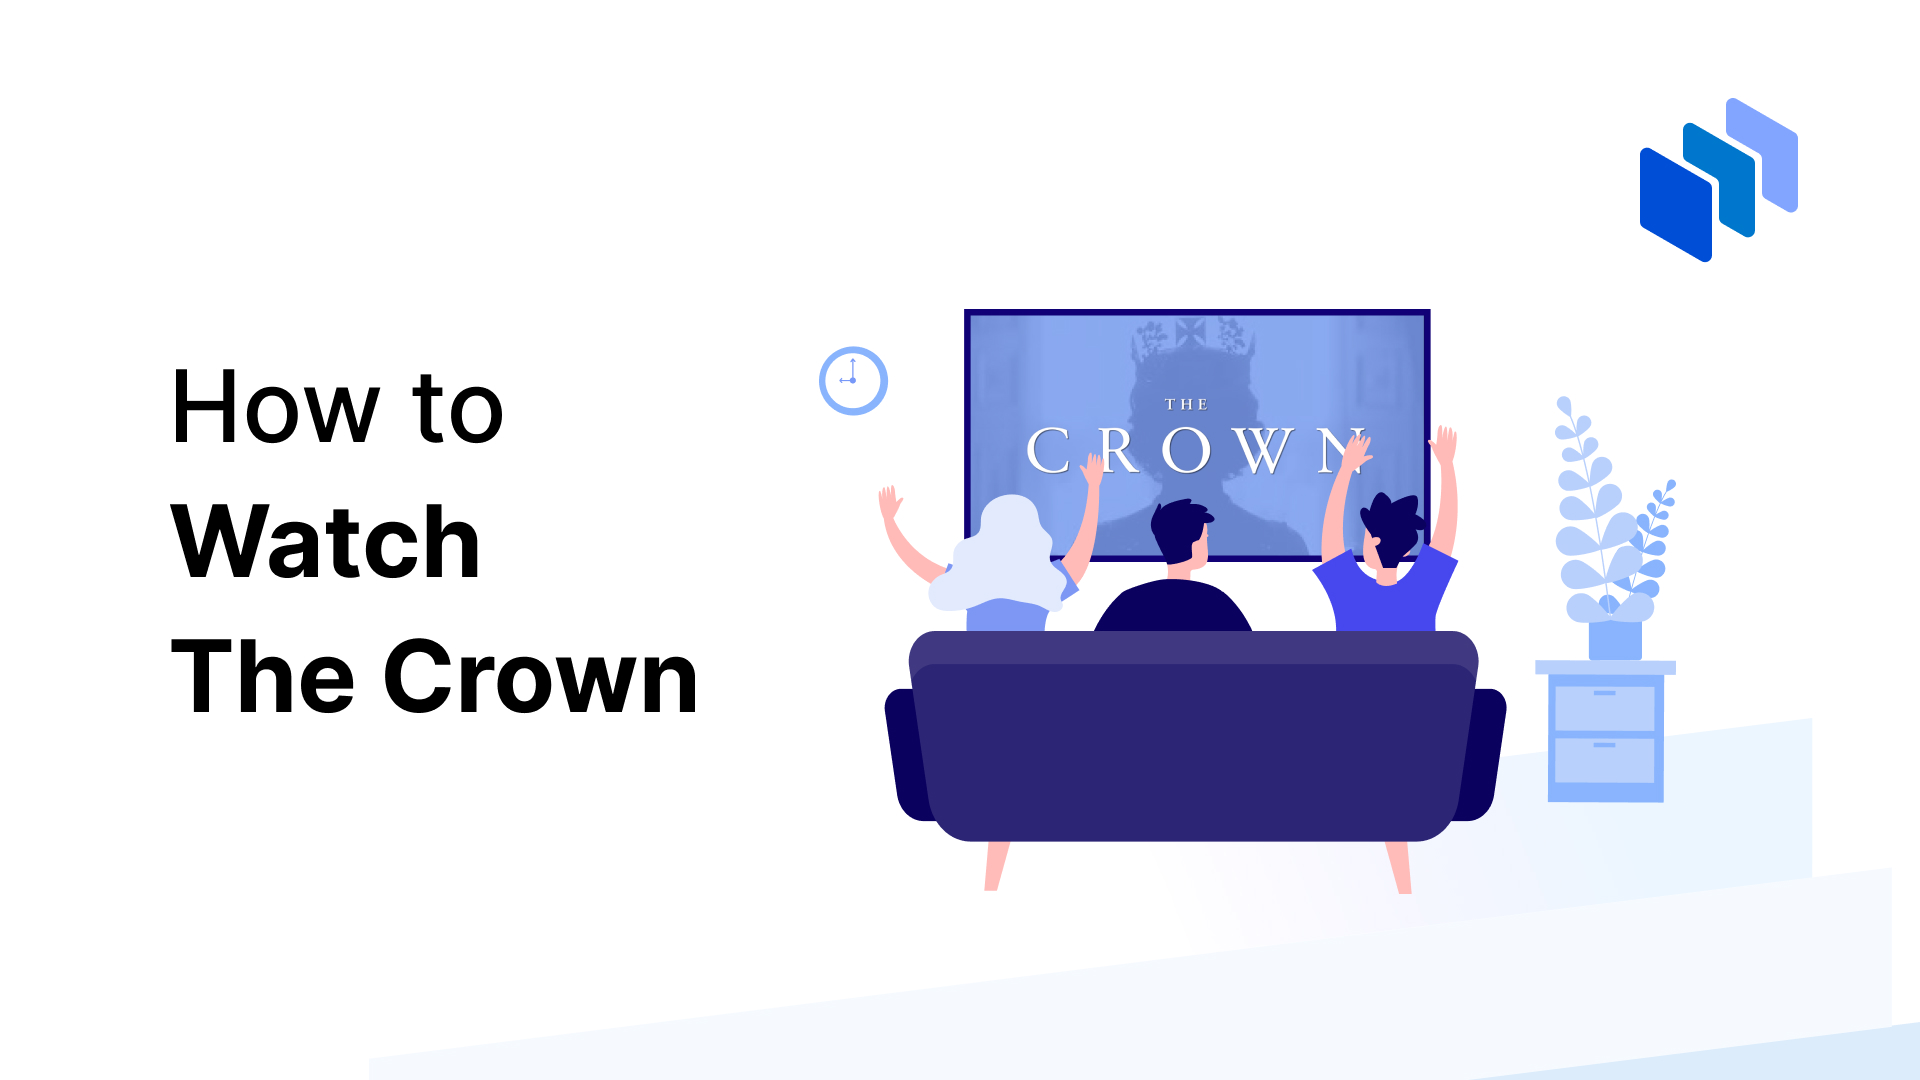 How to Watch The Crown